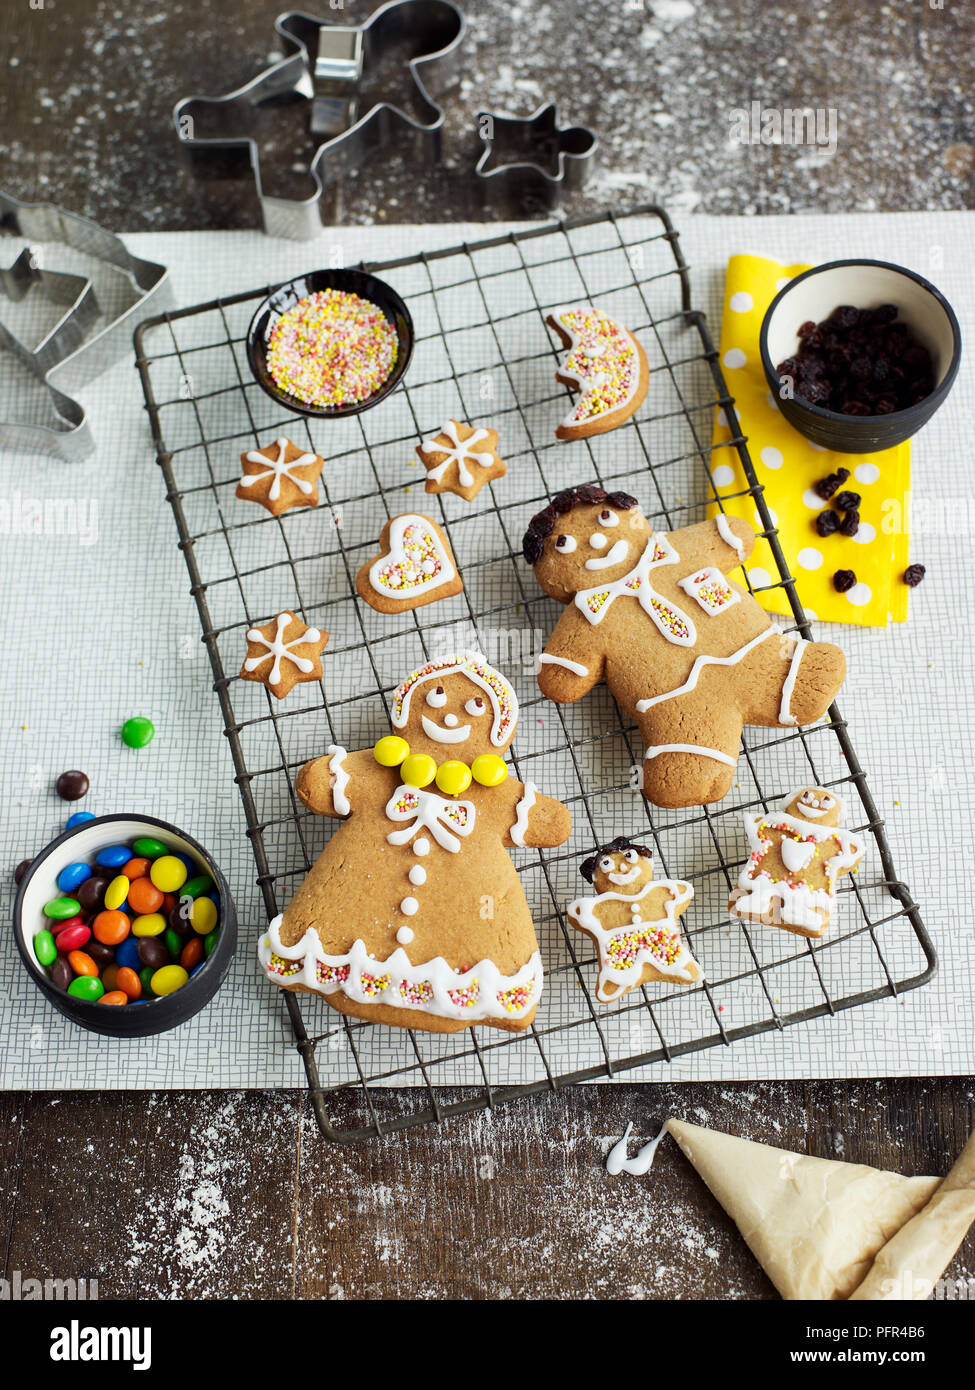 Gingerbread men and shapes with icing on cooling rack Stock Photo